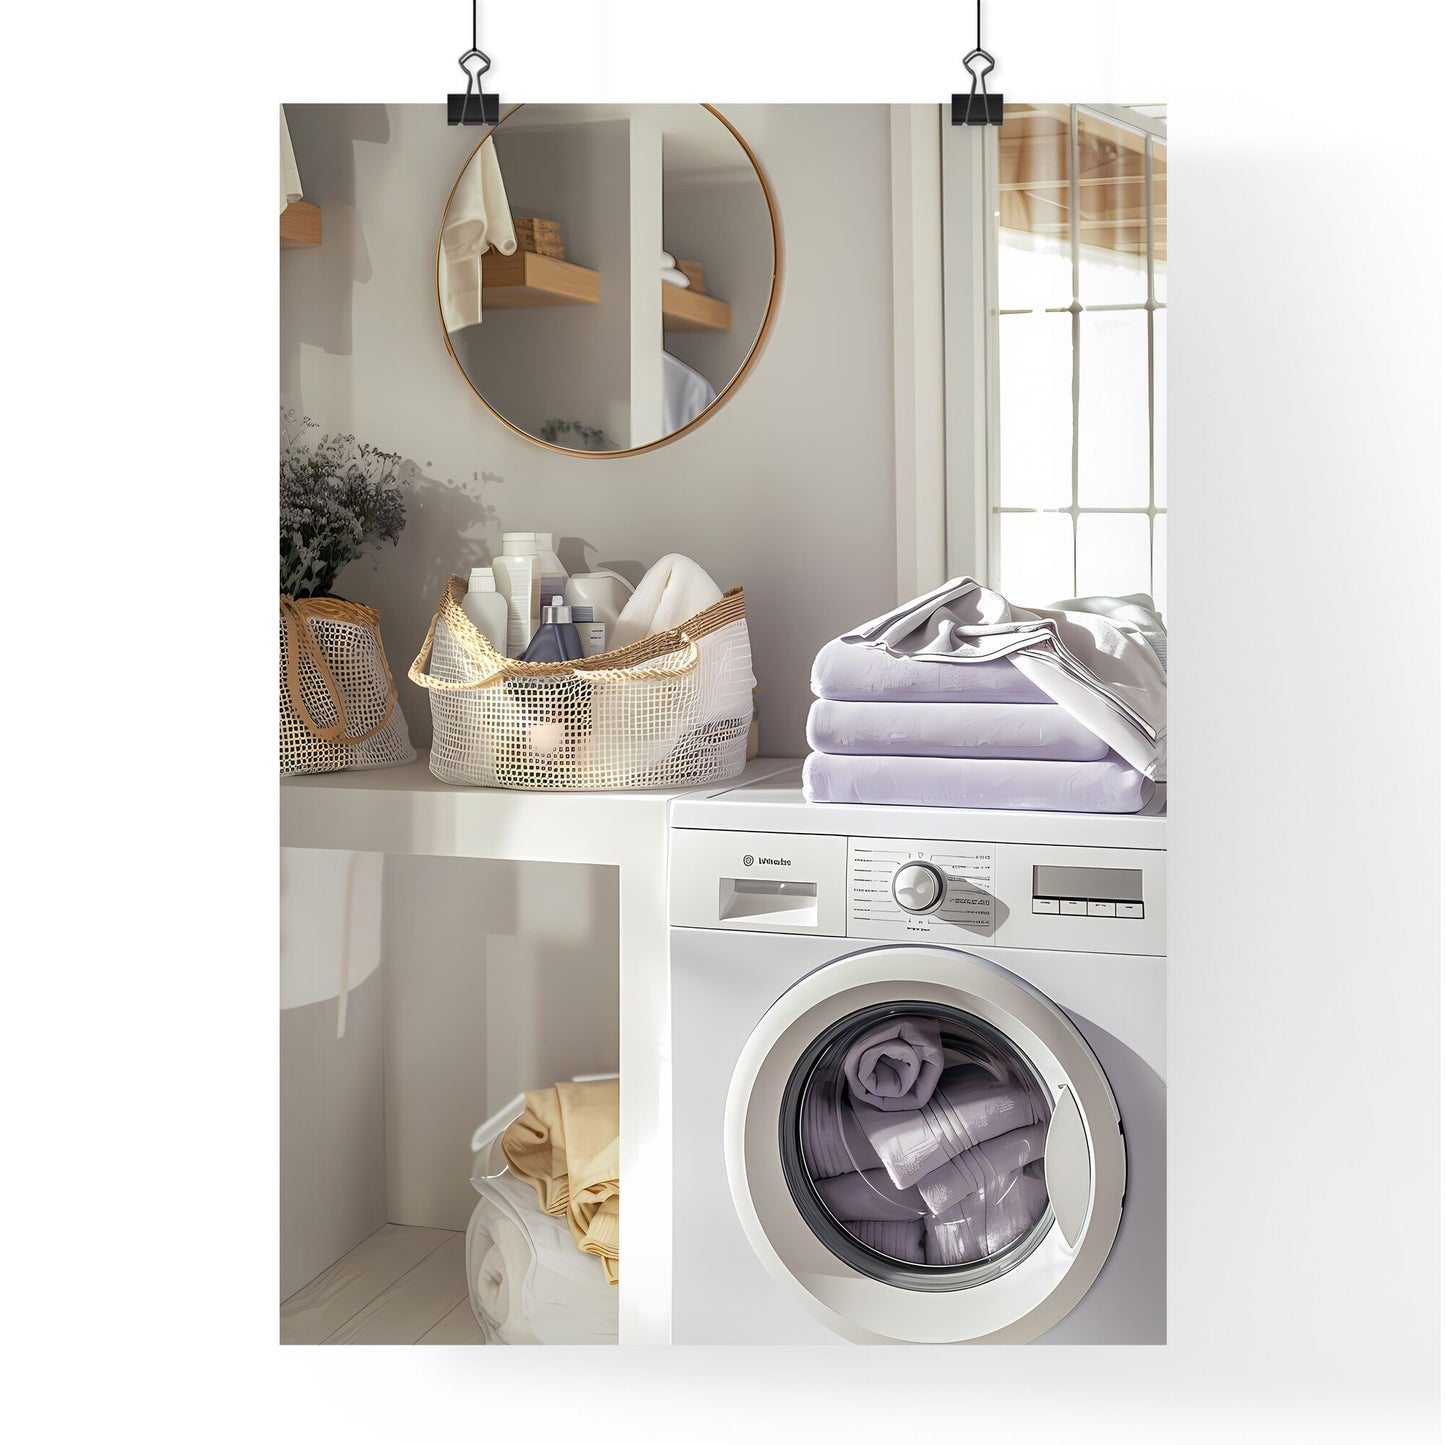 White and purple laundry room decor with complementary colored items, natural wood elements, painting, open washing machine with towels Default Title